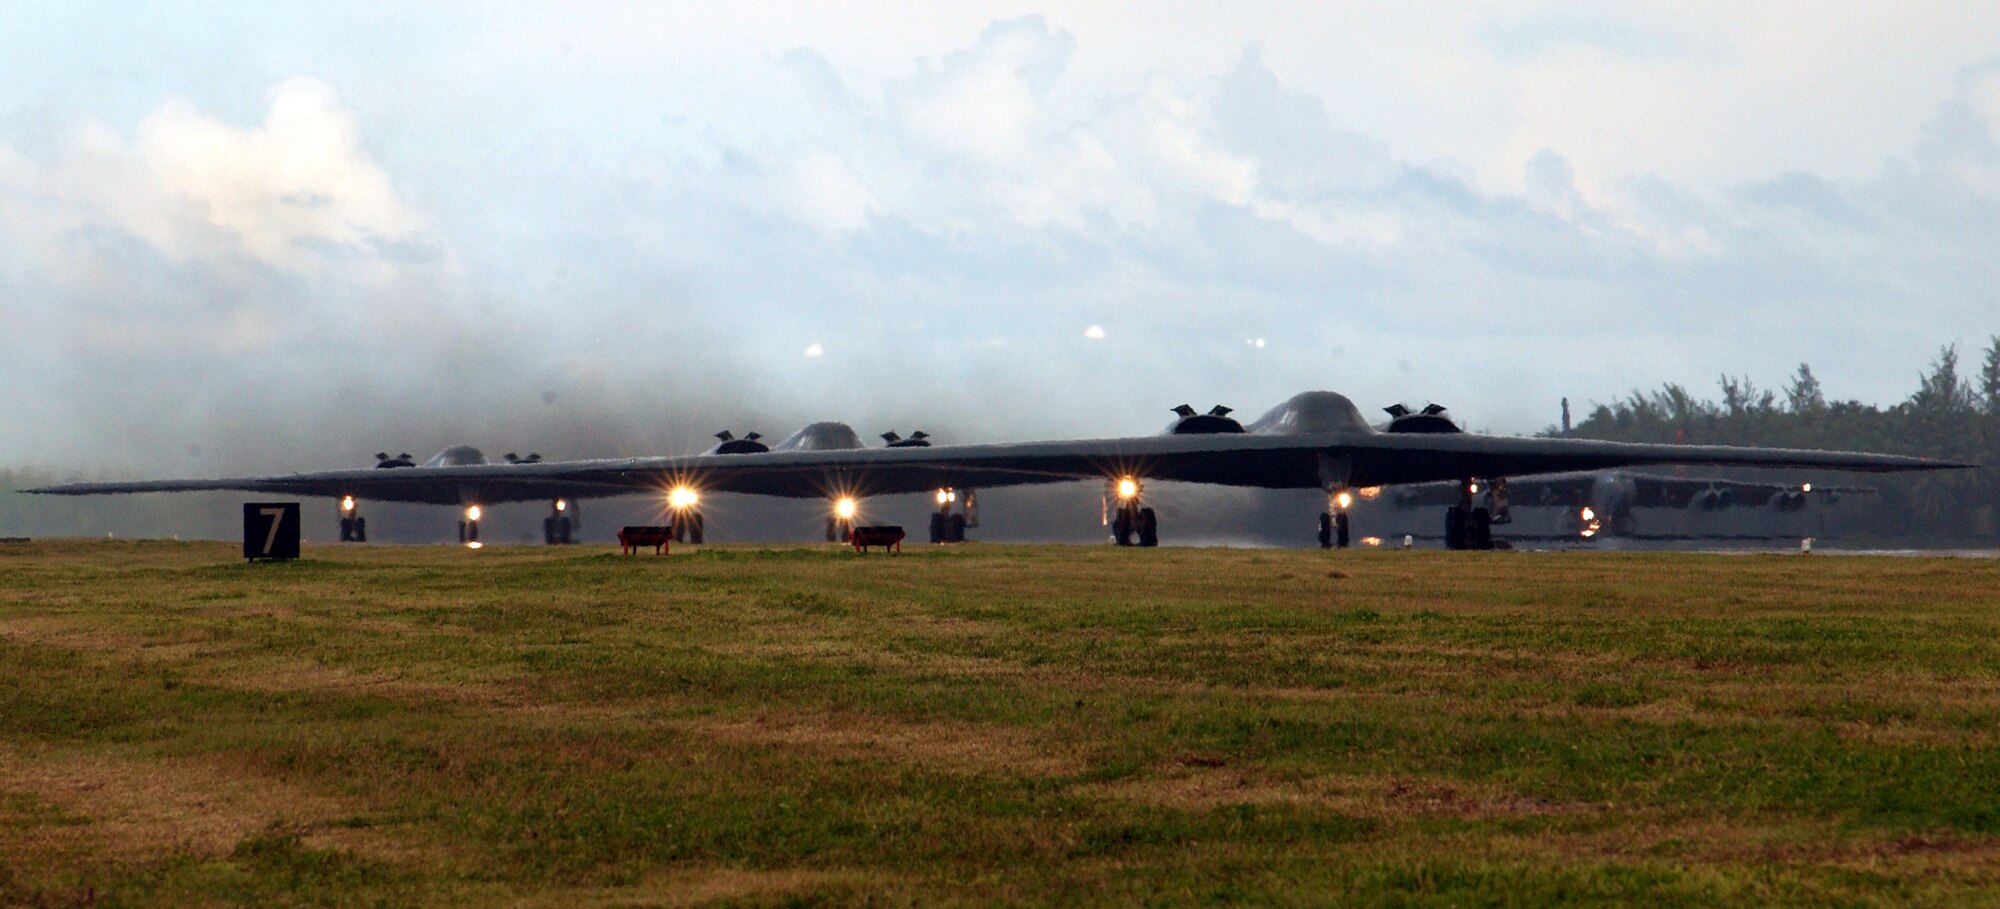 OPERATION IRAQI FREEDOM -- B-2 Spirit bombers taxi down the runway in preparation for the largest insertion of bombers since the Viet Nam conflict.  This flight will mark the official beginning of Operation Iraqi Freedom.  (U.S. Air Force photo by Tech. Sgt. Janice Cannon)